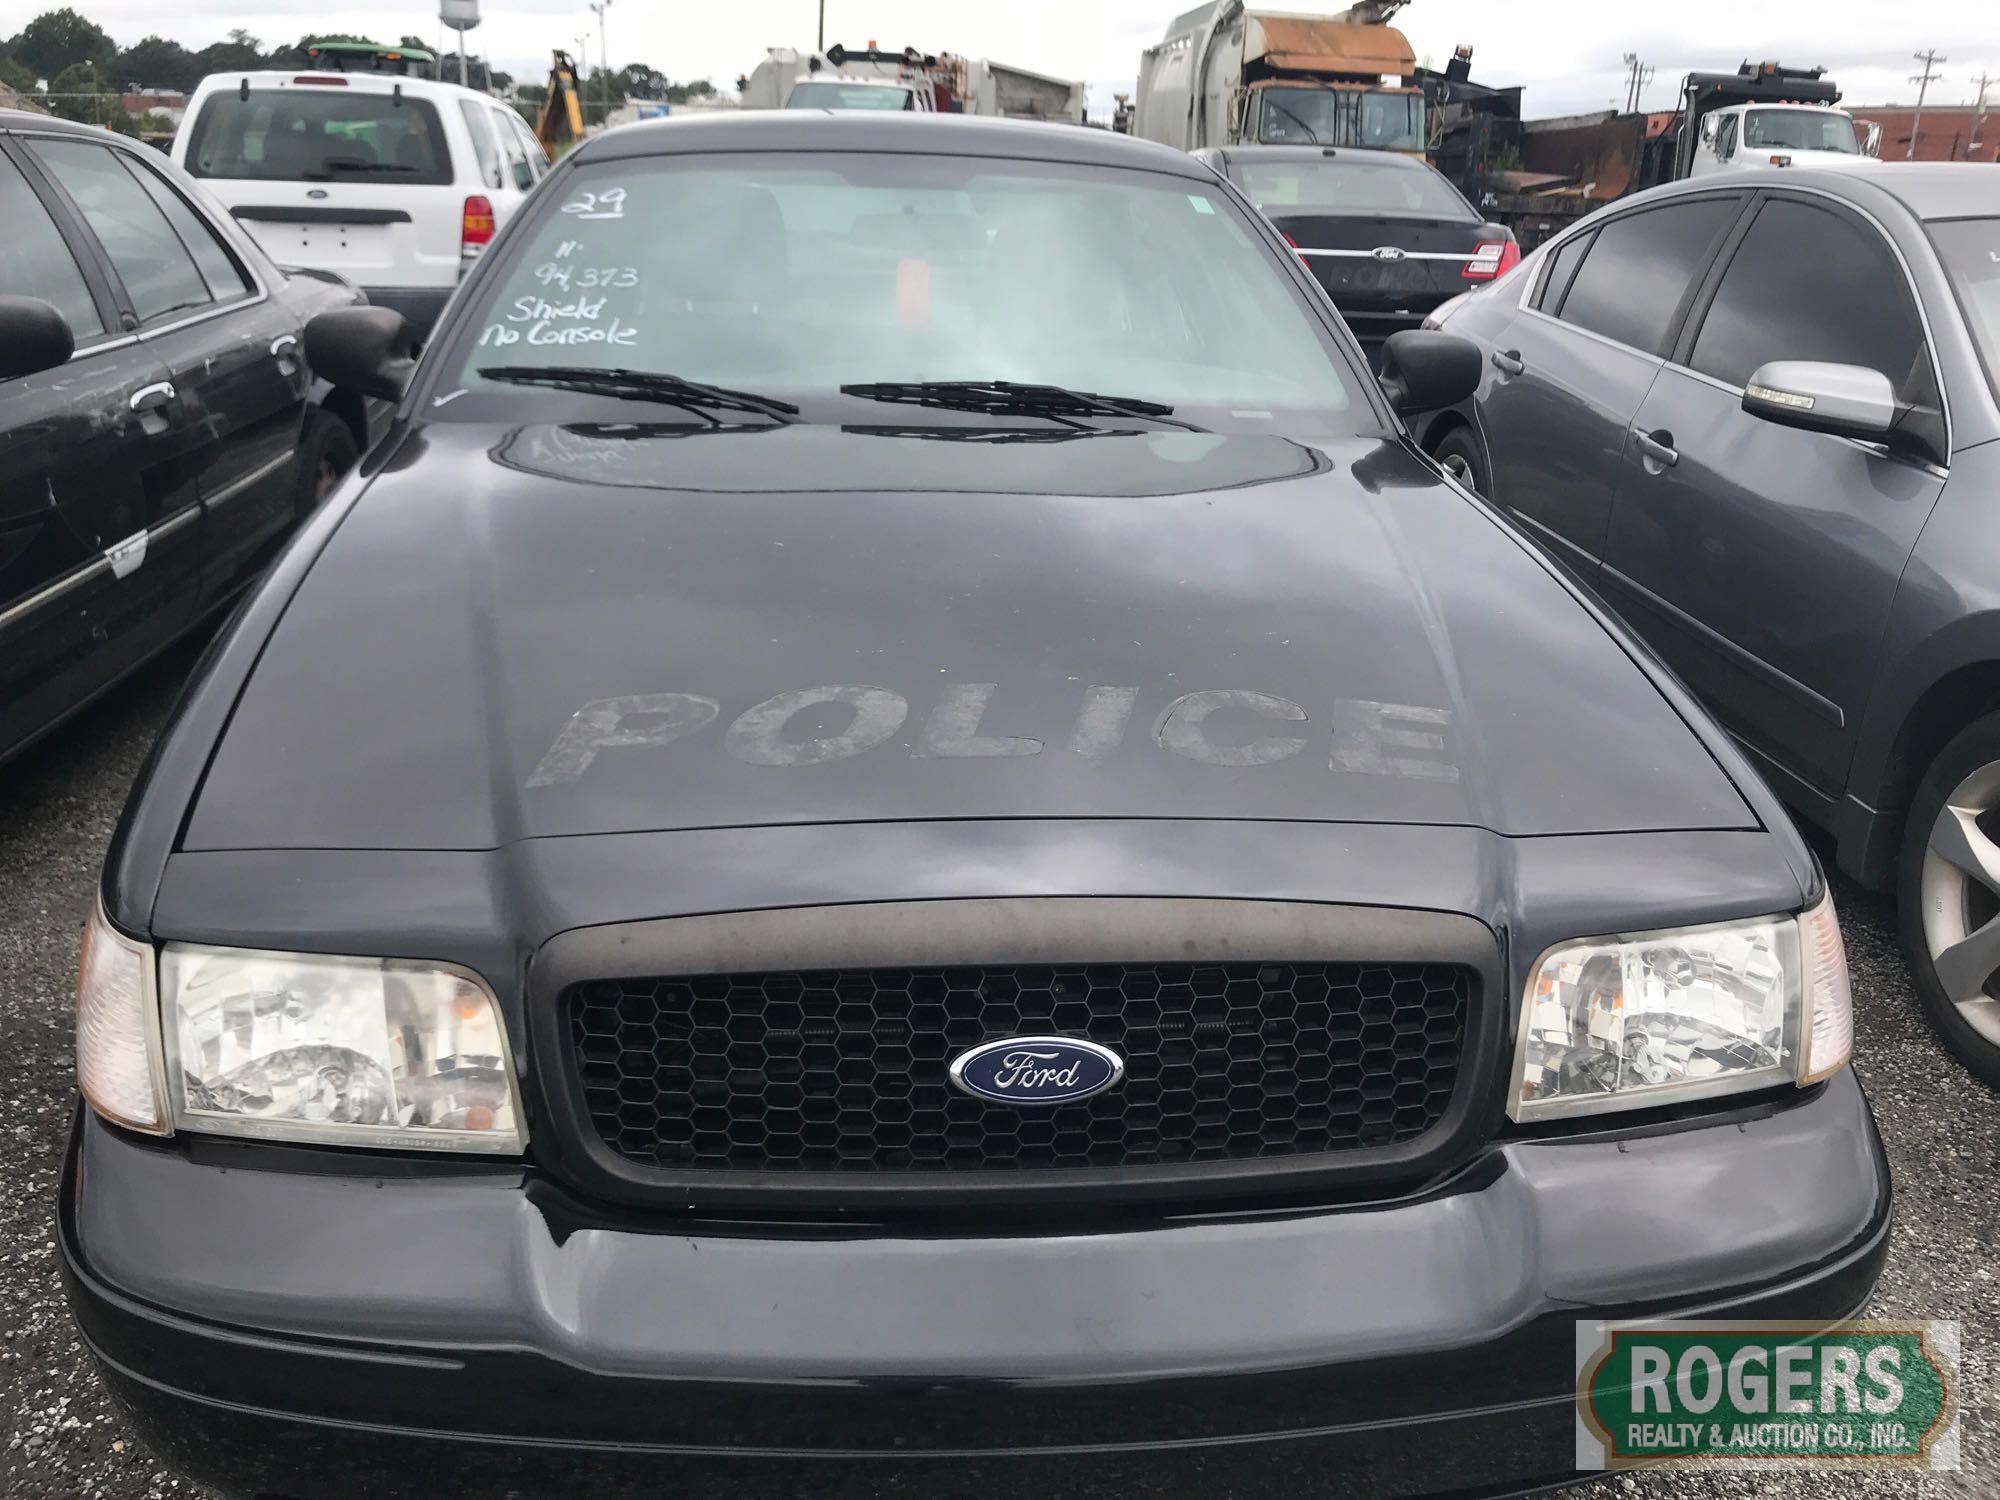 2011 Ford Crown Vic, 4.6, 94373 miles, Has Shield, No Console, 2FABP7BV1BX154331